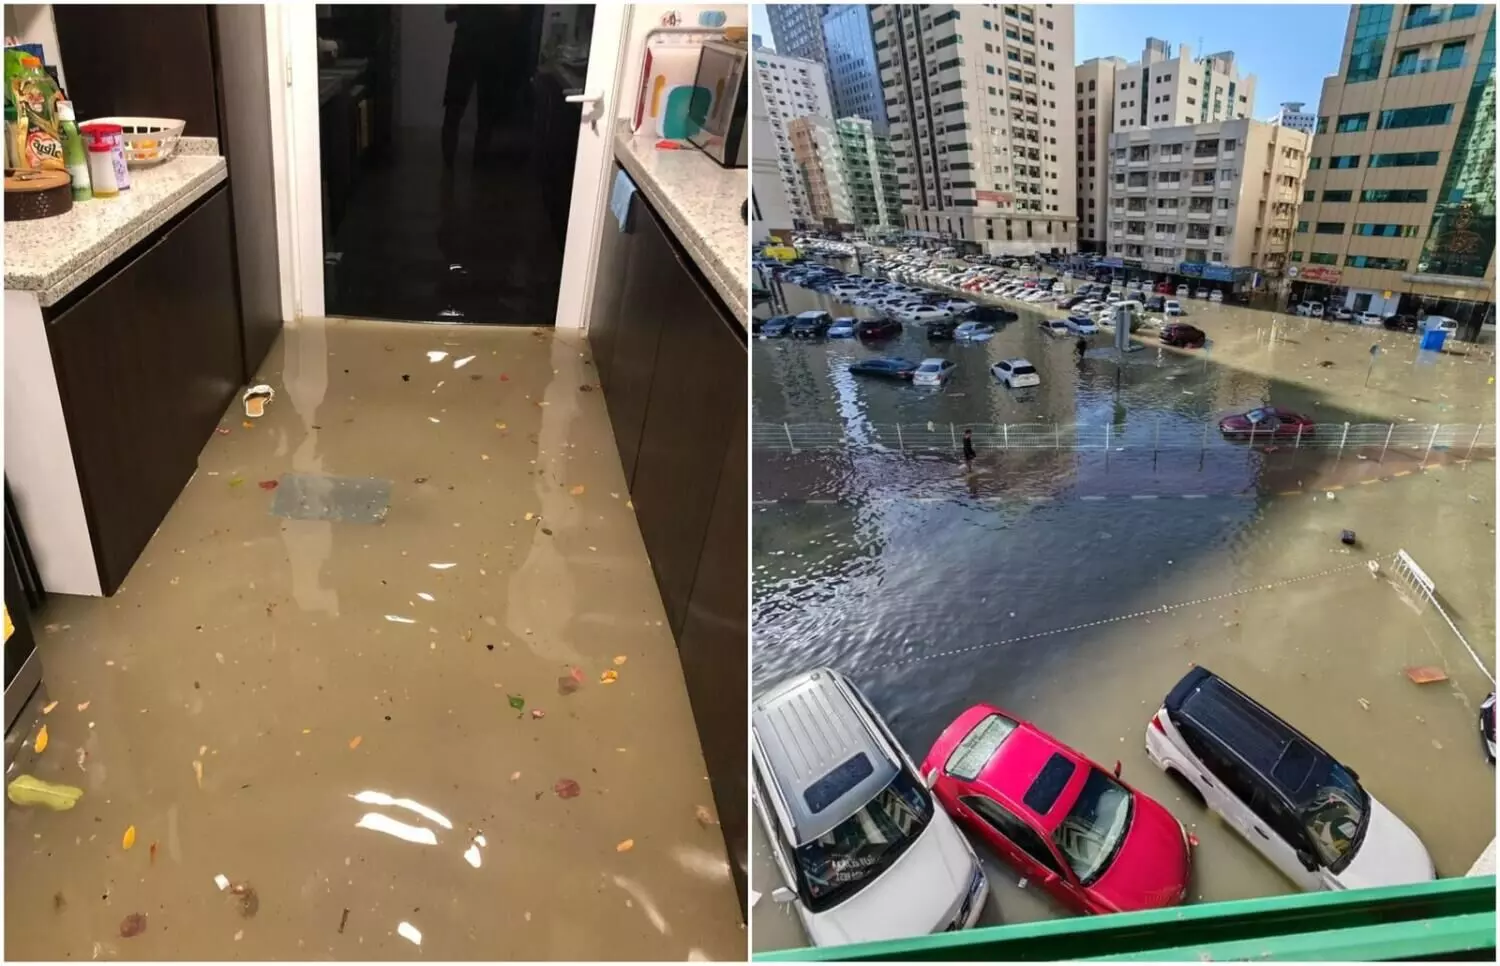 UAE hit with unprecedented rainfall, residents face flooded homes